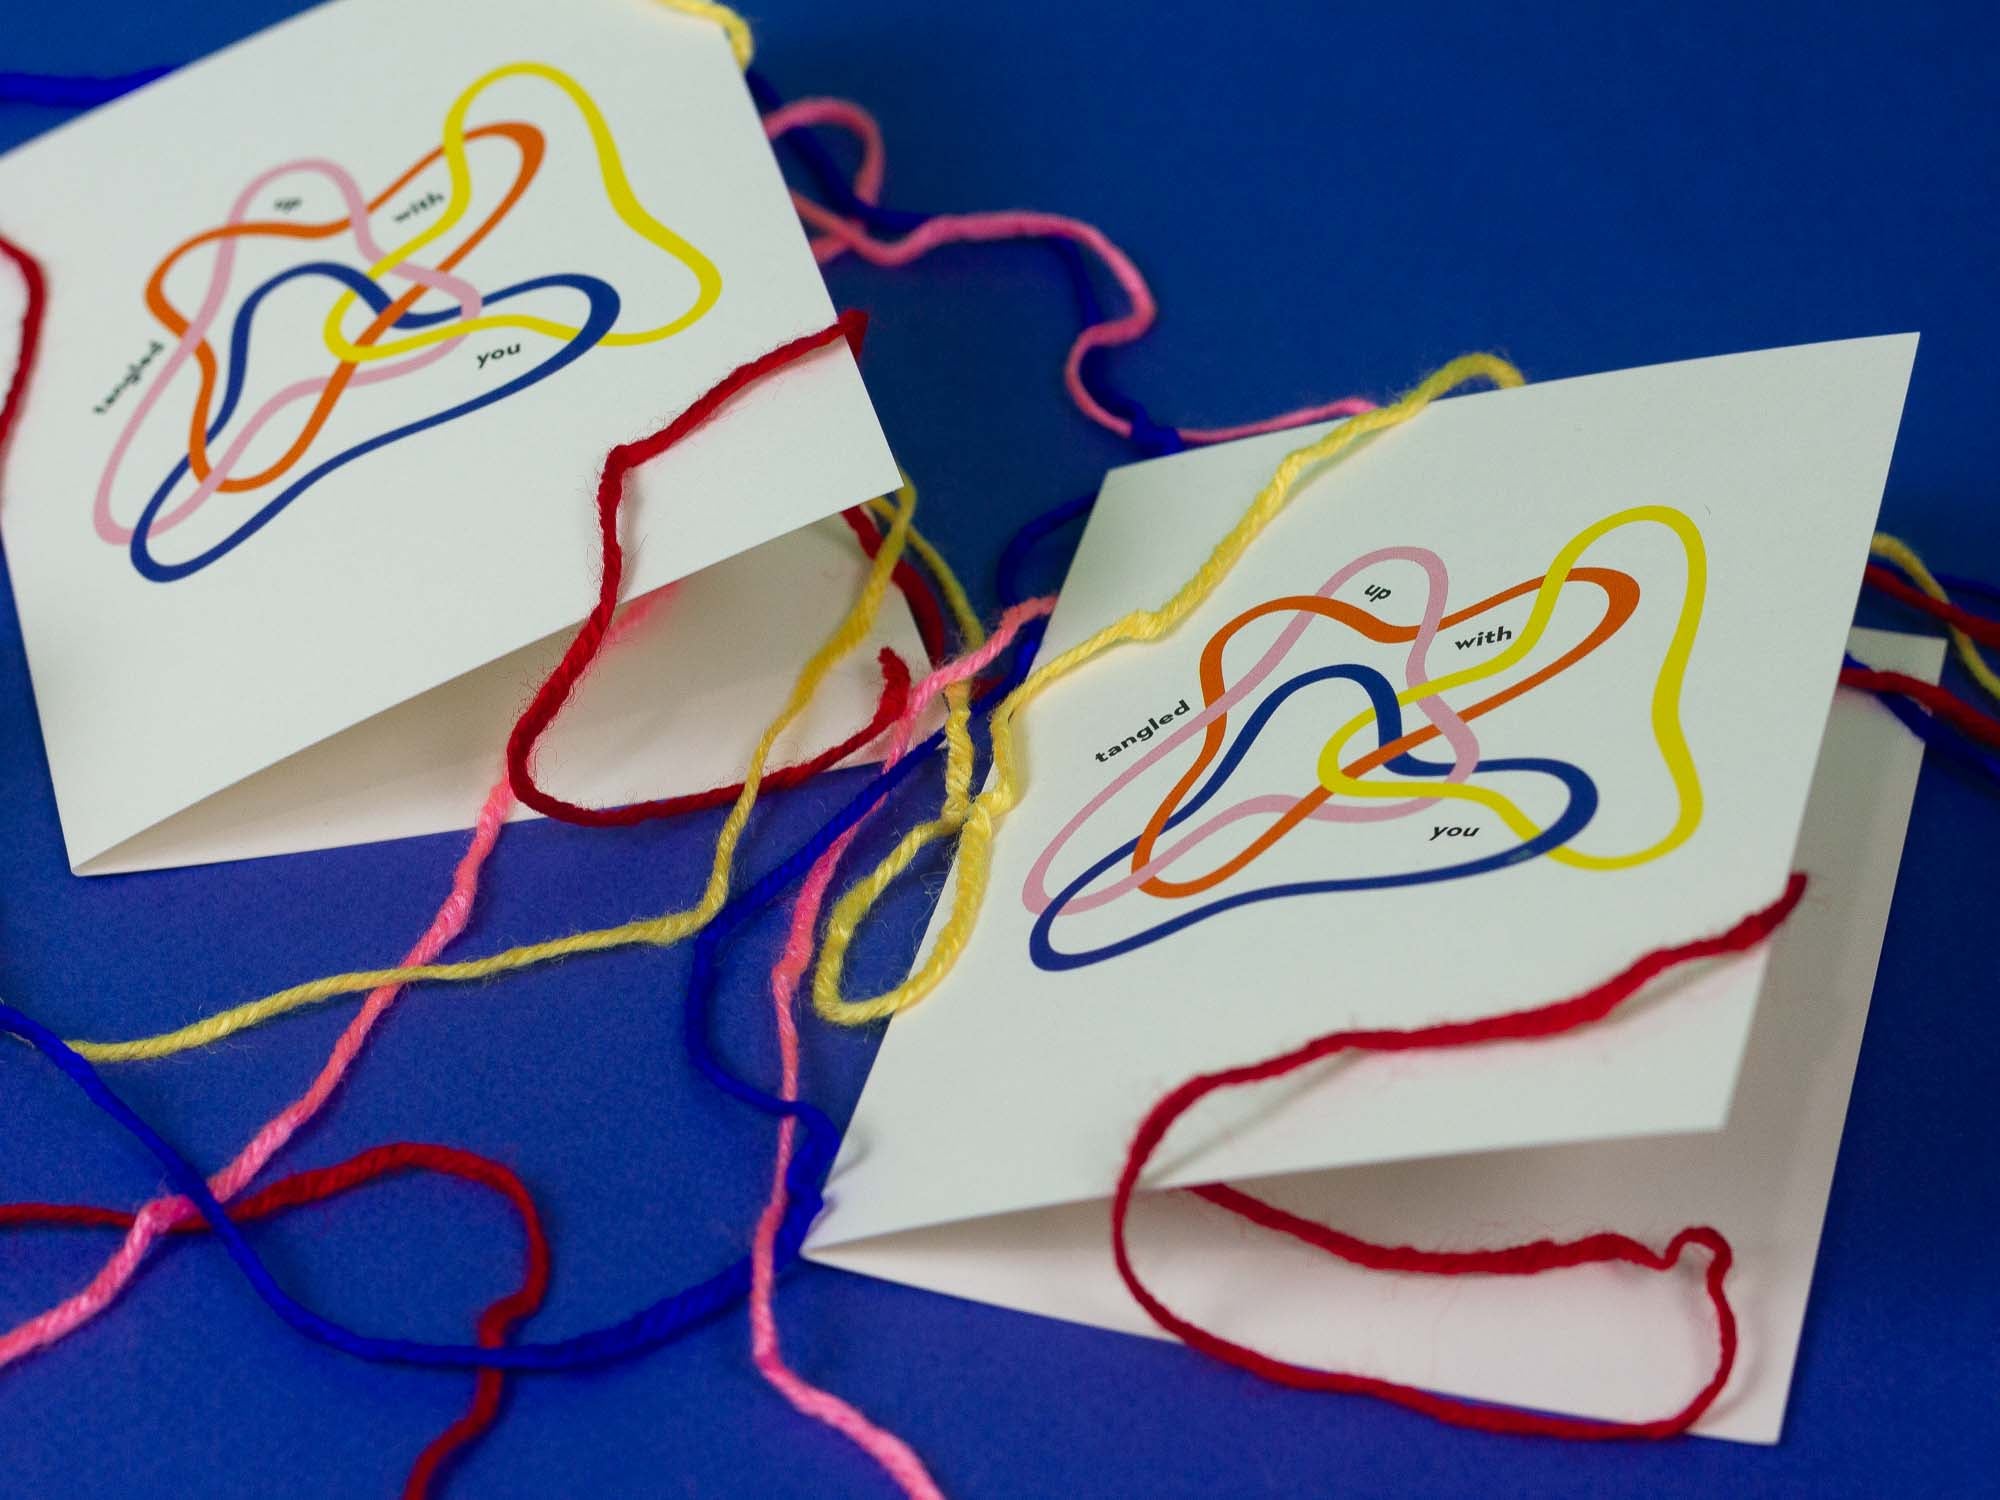 "Tangled Up With You" love card, anniversary card, or valentine's day card with abstract interlocking tangled up shapes. Made in USA by @mydarlin_bk